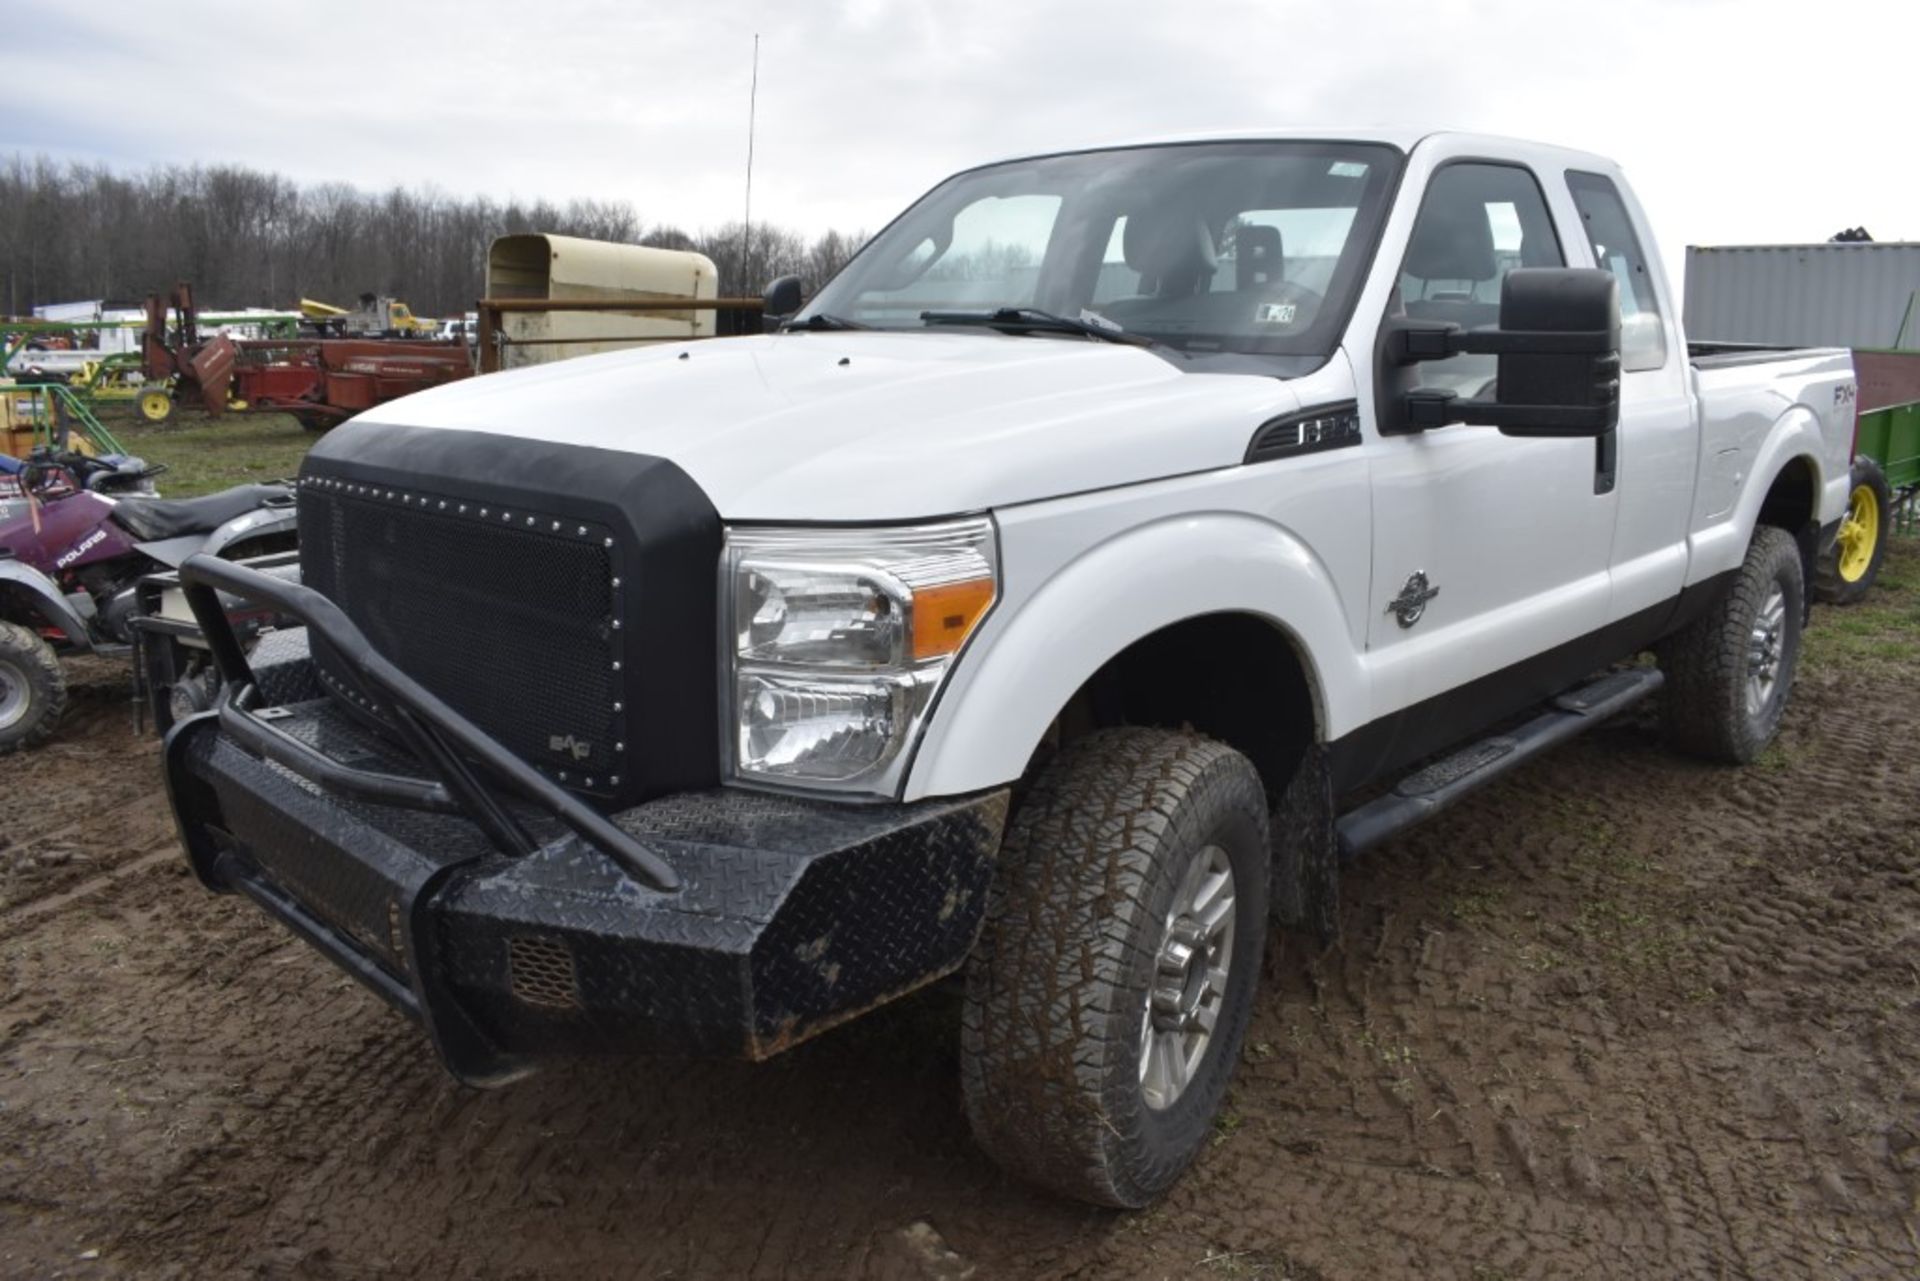 2011 Ford F-250 Super Duty Truck - Image 6 of 40